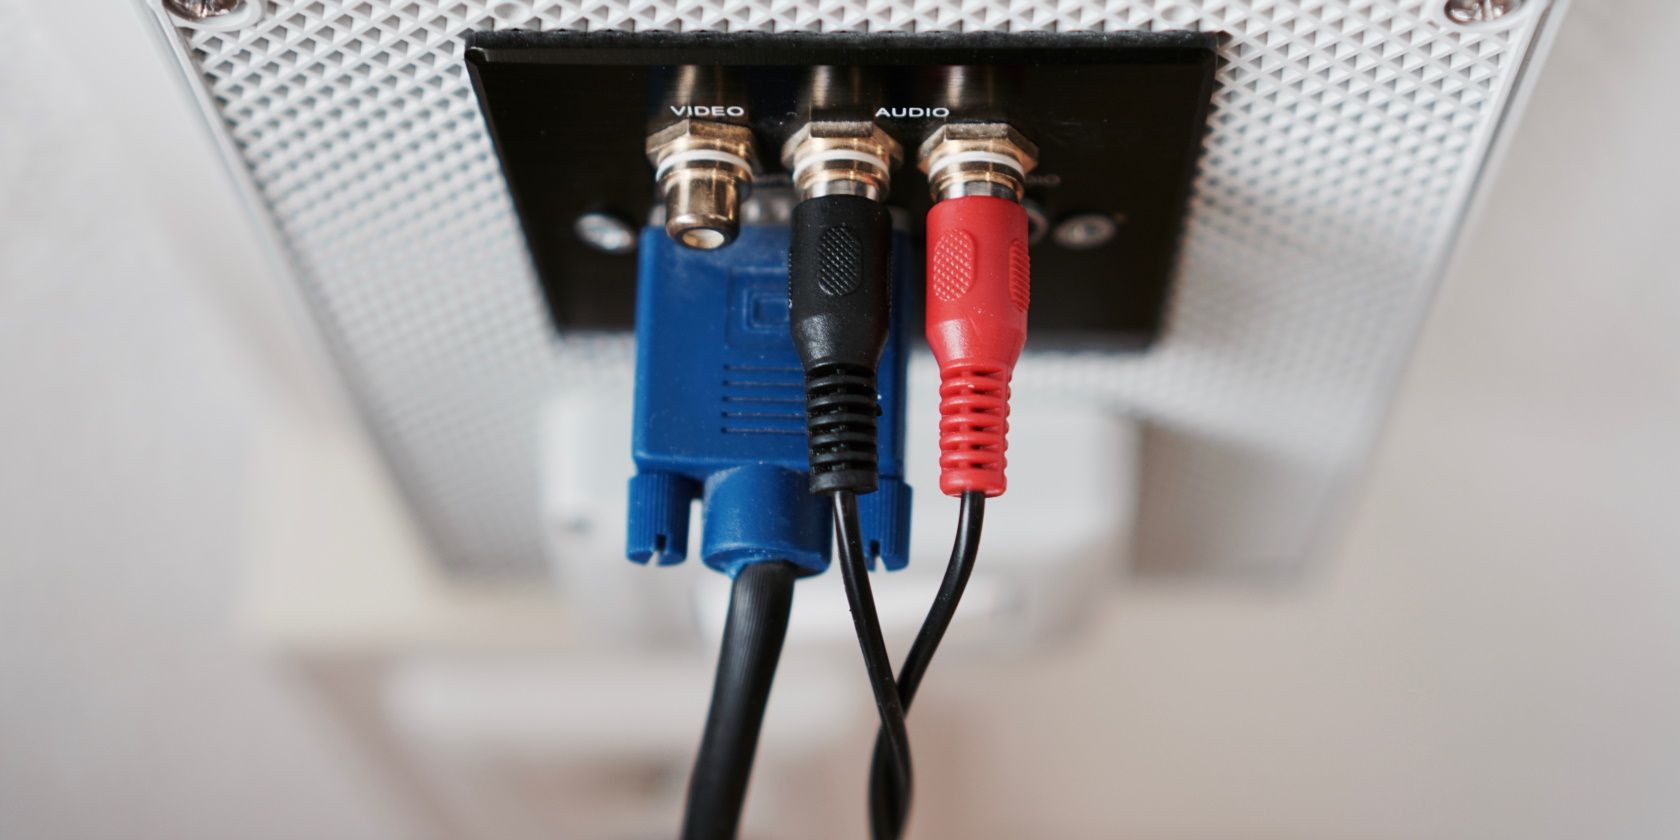 Audio jacks connected to a device